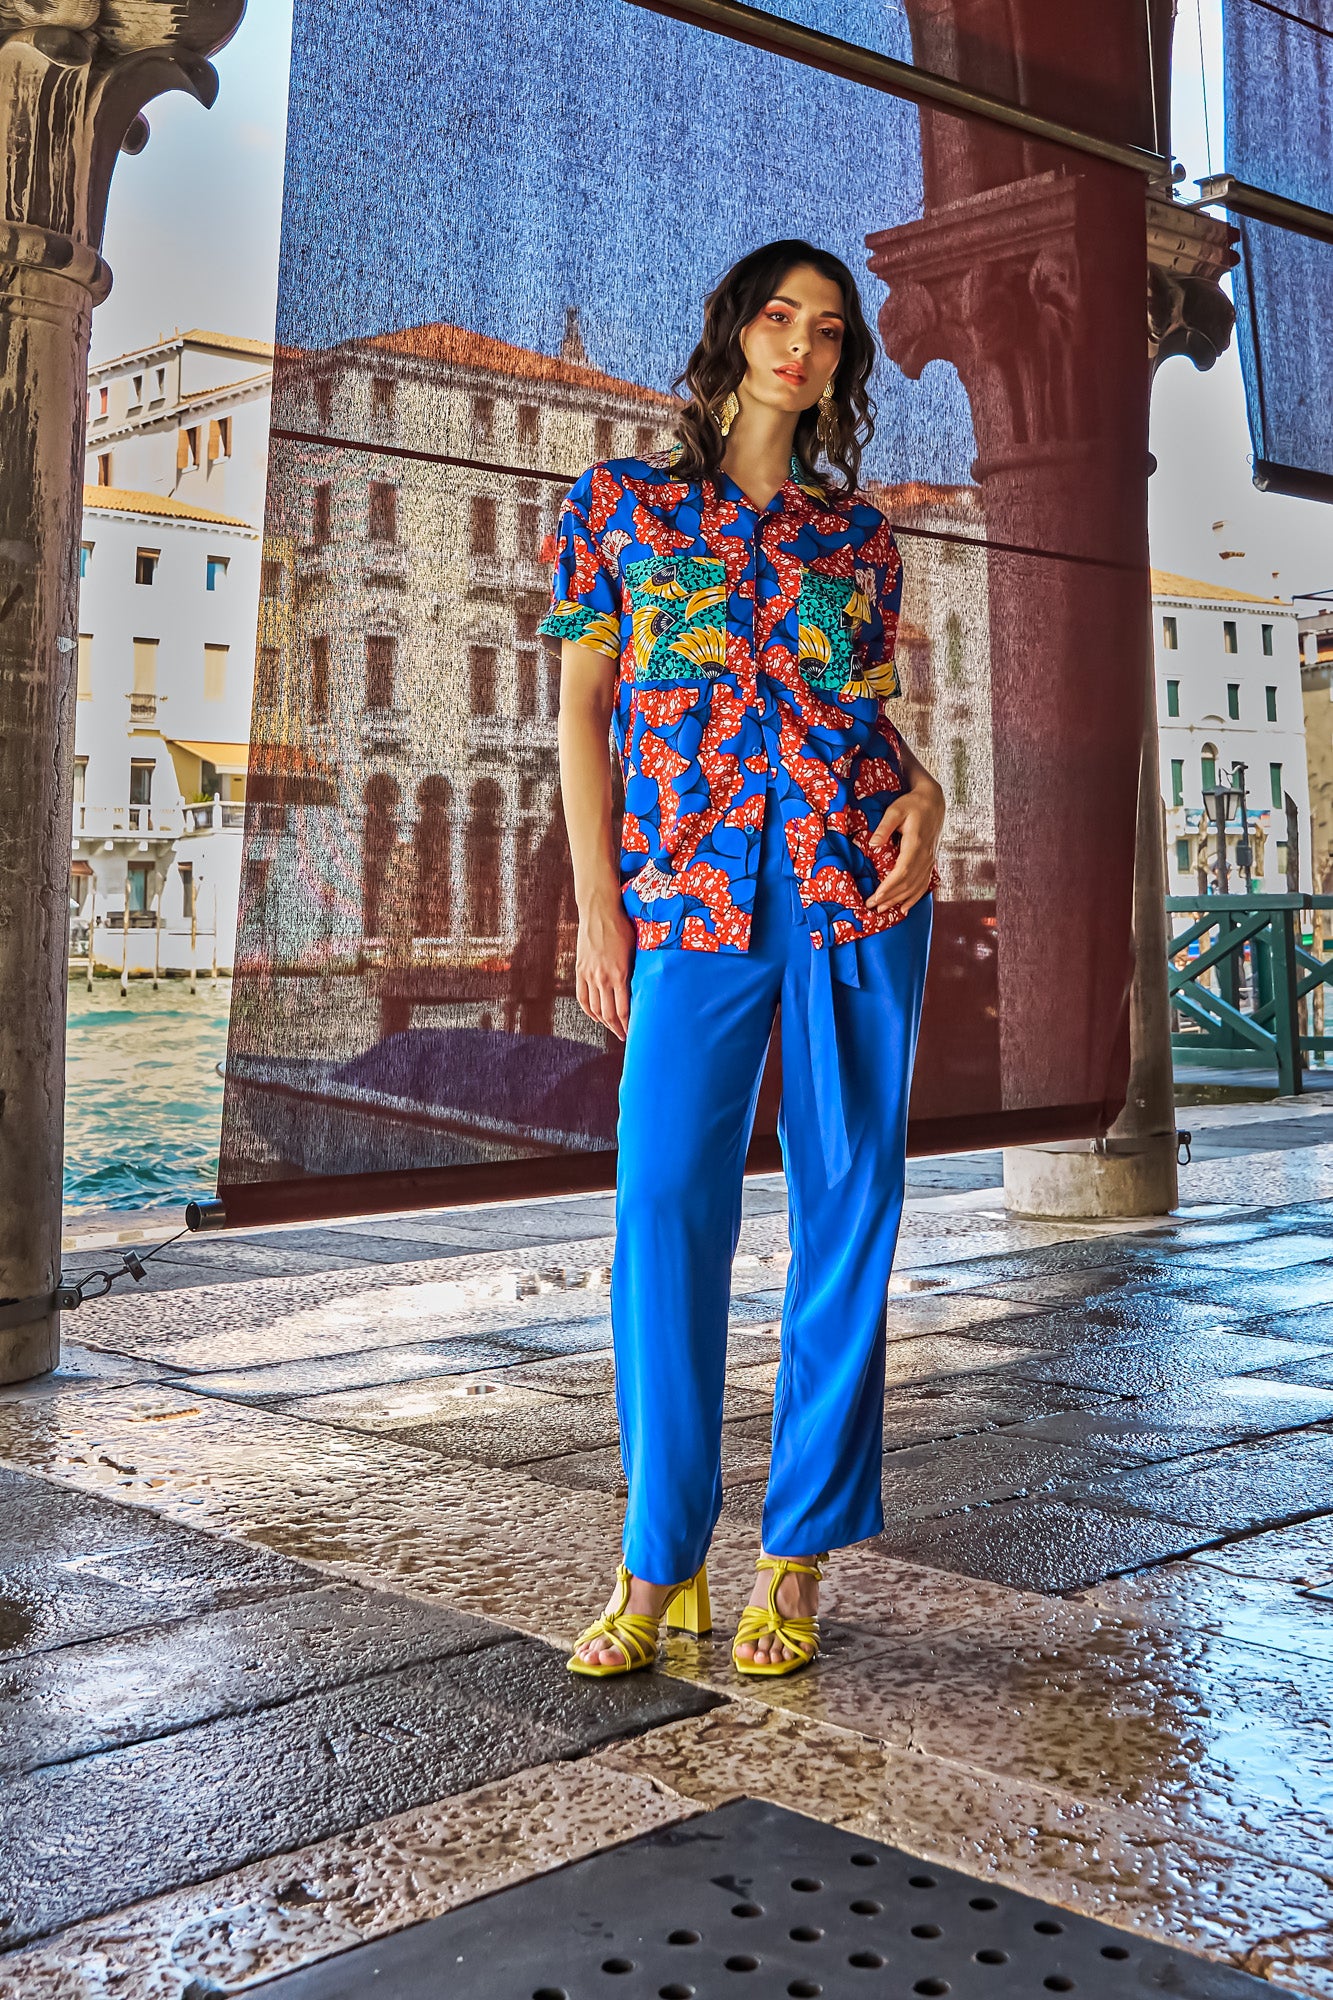 Yinka Shirt with Contrasting Collar and Pockets - Mix Match Blue Red Yellow and Cyan Print | ILC OA OG